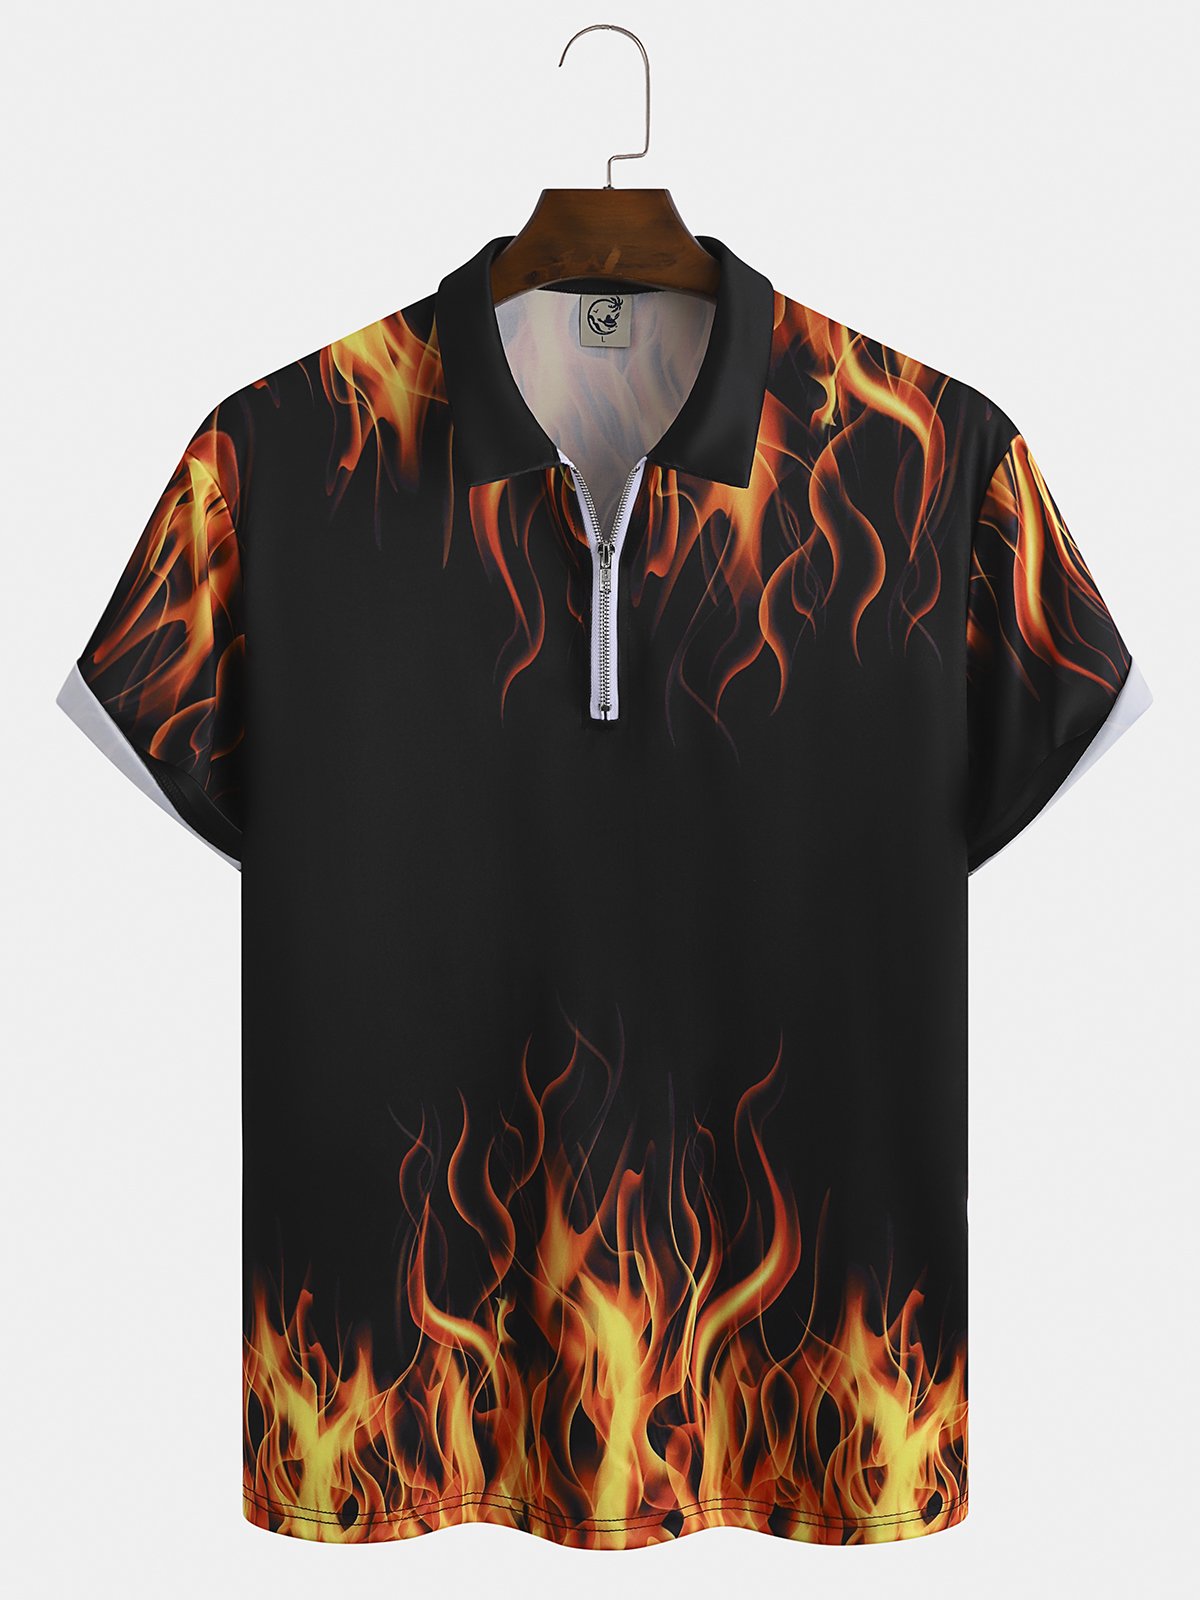 Casual Culture Collection Retro Western Culture Gradient Flame Element Pattern Lapel Short Sleeve Polo Print Top